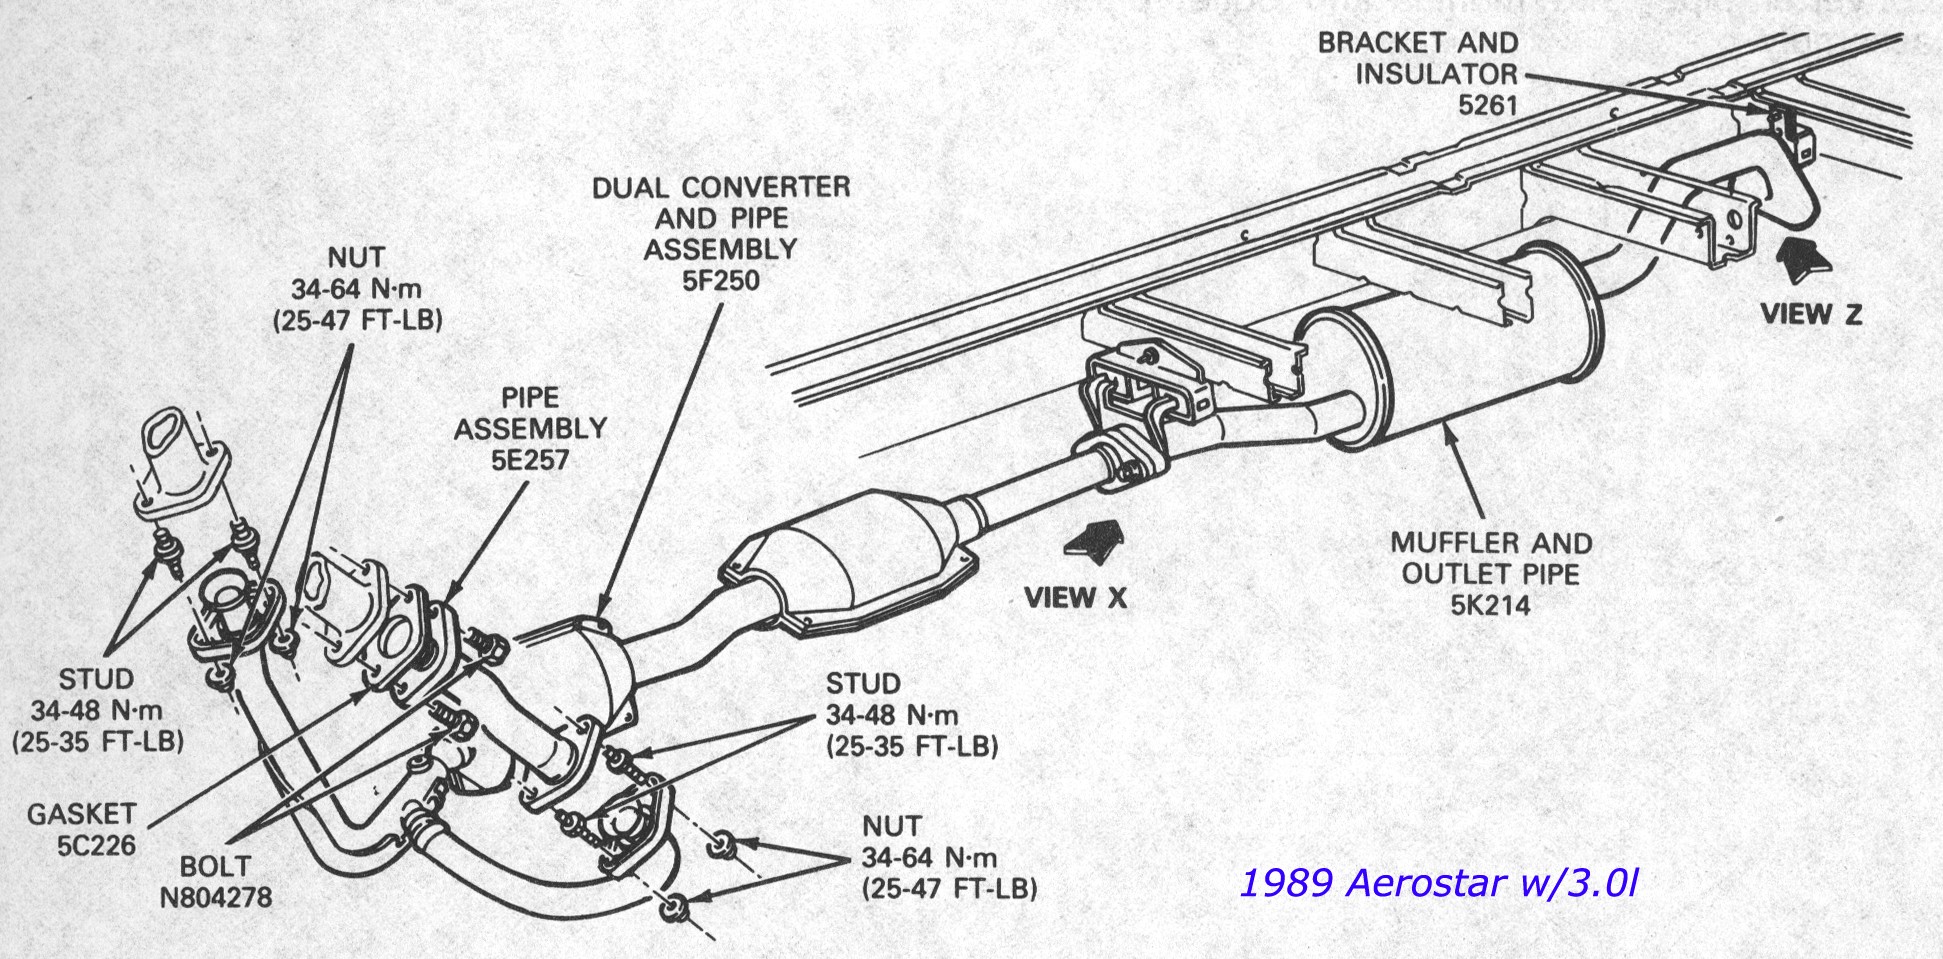 2000 F150 Exhaust System Diagram. i have a 2000 ford f150 4x4 5 7l v8